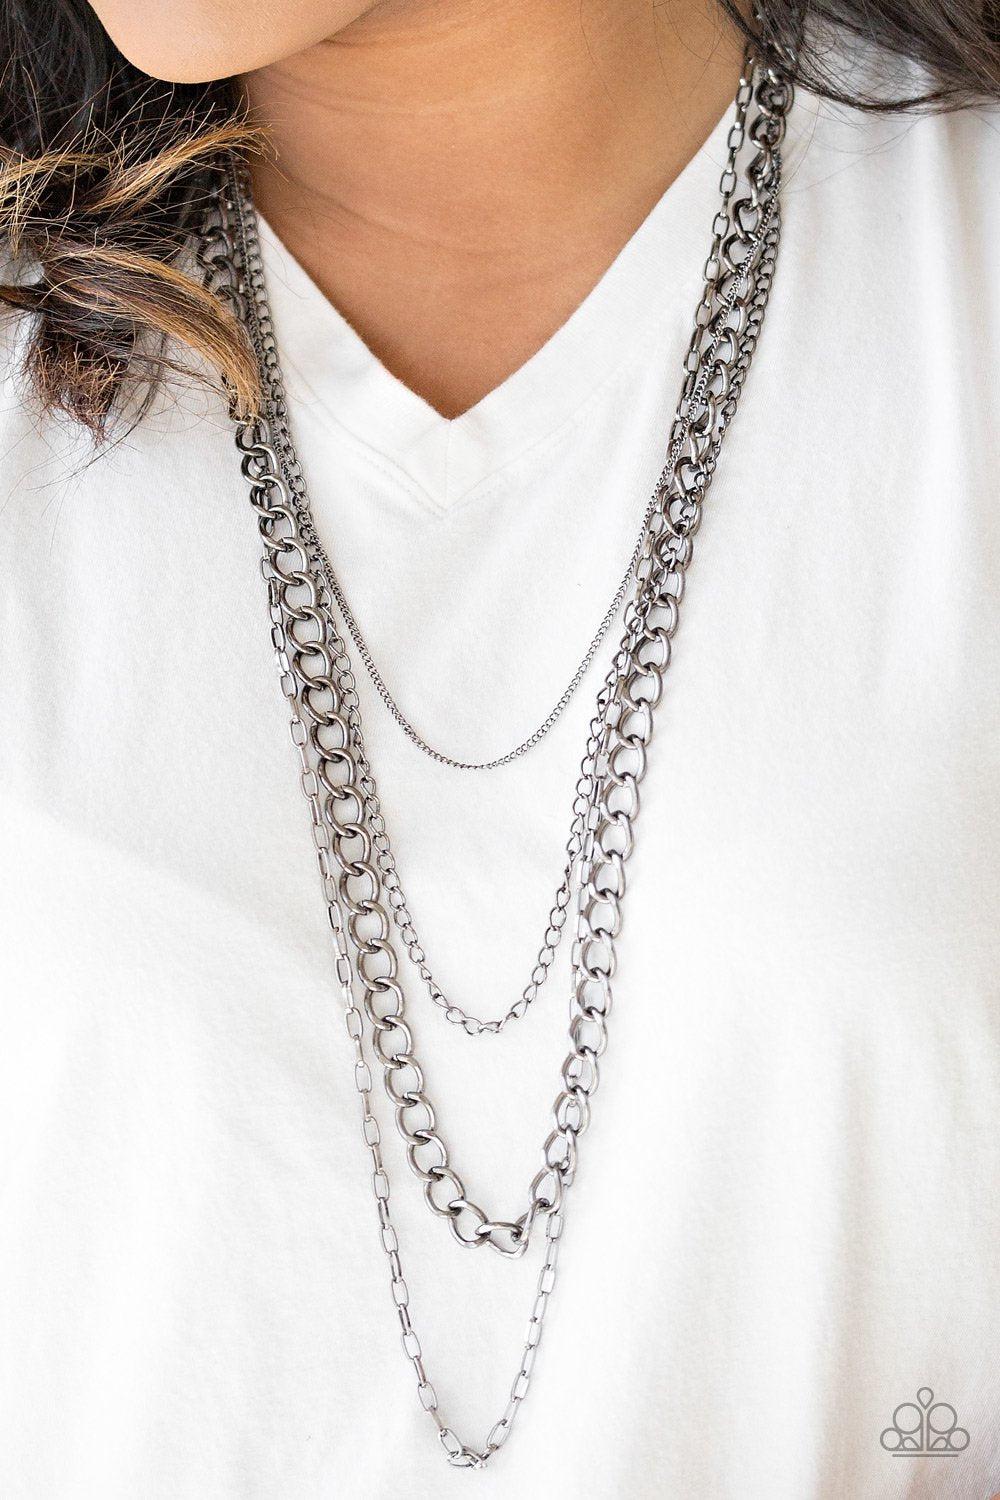 Metro Metal Long Gunmetal Black Chain Necklace - Paparazzi Accessories-CarasShop.com - $5 Jewelry by Cara Jewels